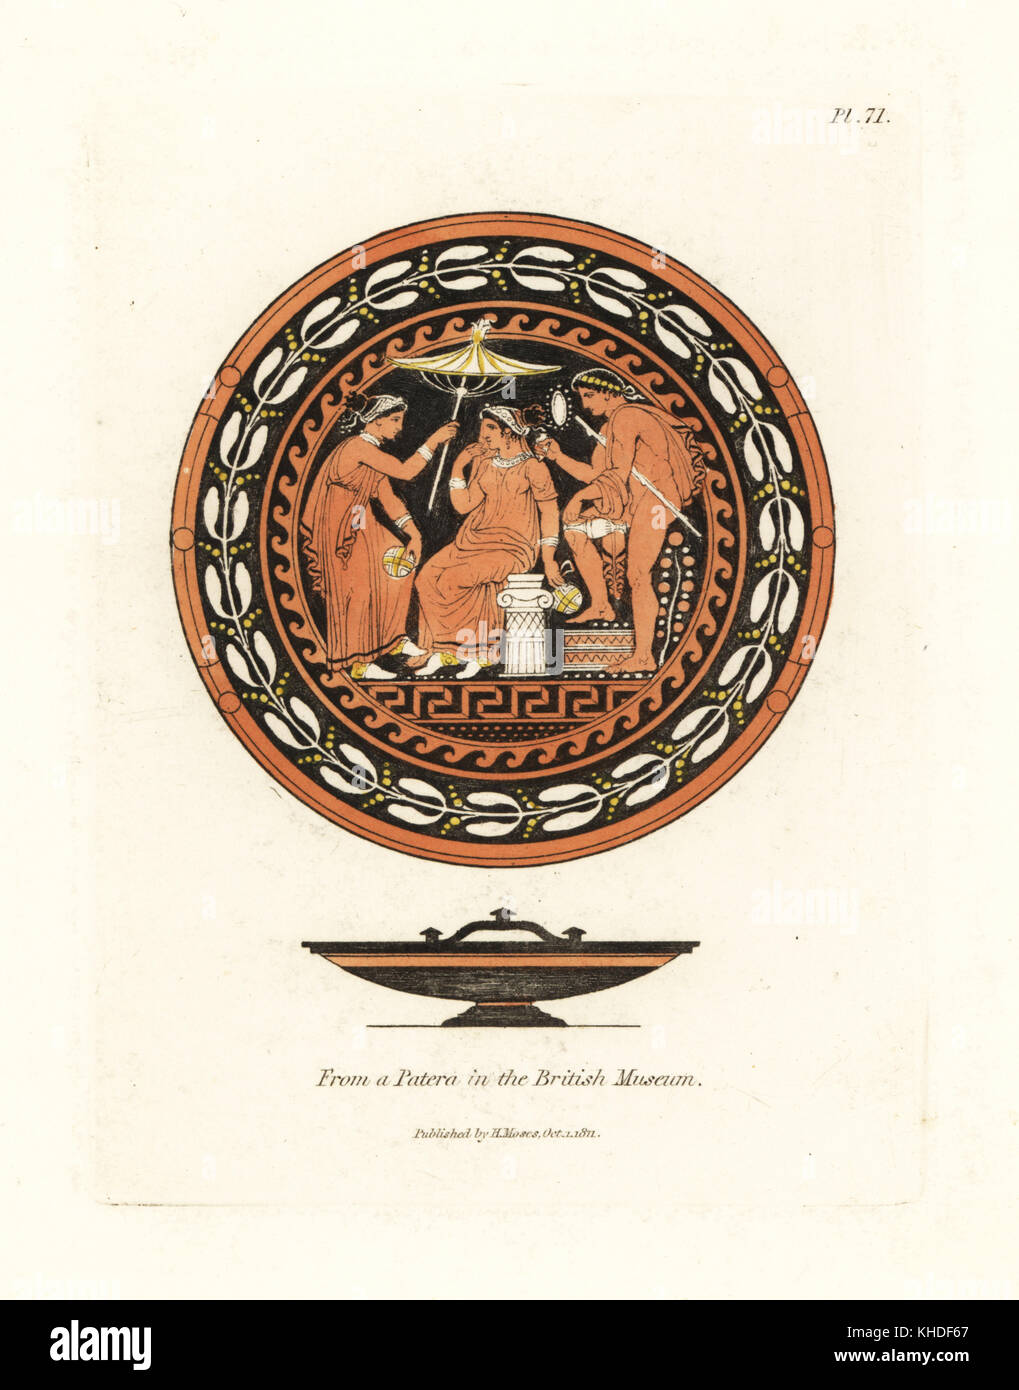 Patera in the British Museum. Shallow ceramic dish with mythological or historical figures with parasol and vase. Handcoloured copperplate engraving by Henry Moses from A Collection of Antique Vases, Altars, etc., London, 1814. Stock Photo